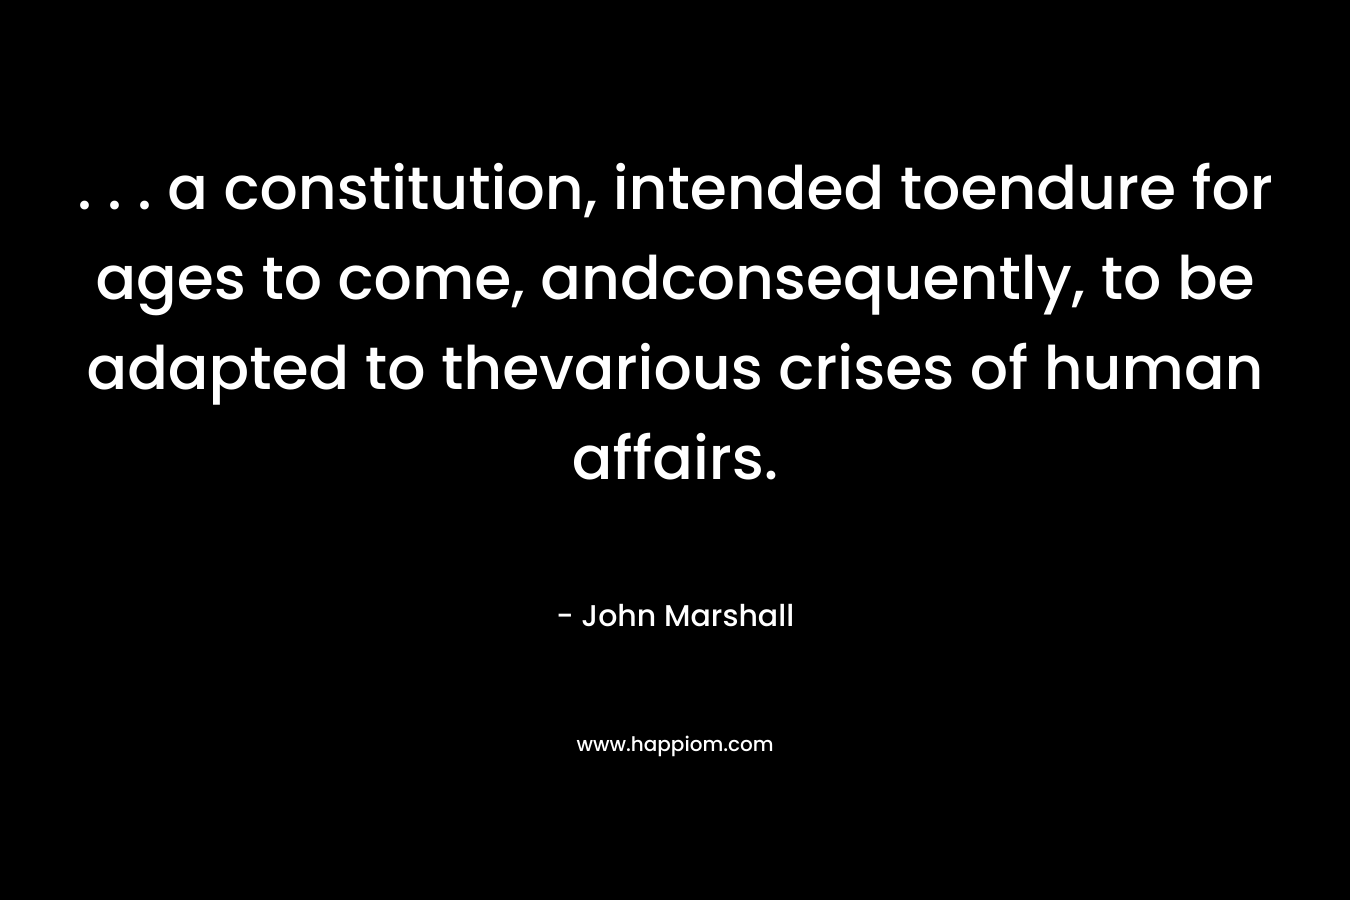 . . . a constitution, intended toendure for ages to come, andconsequently, to be adapted to thevarious crises of human affairs.